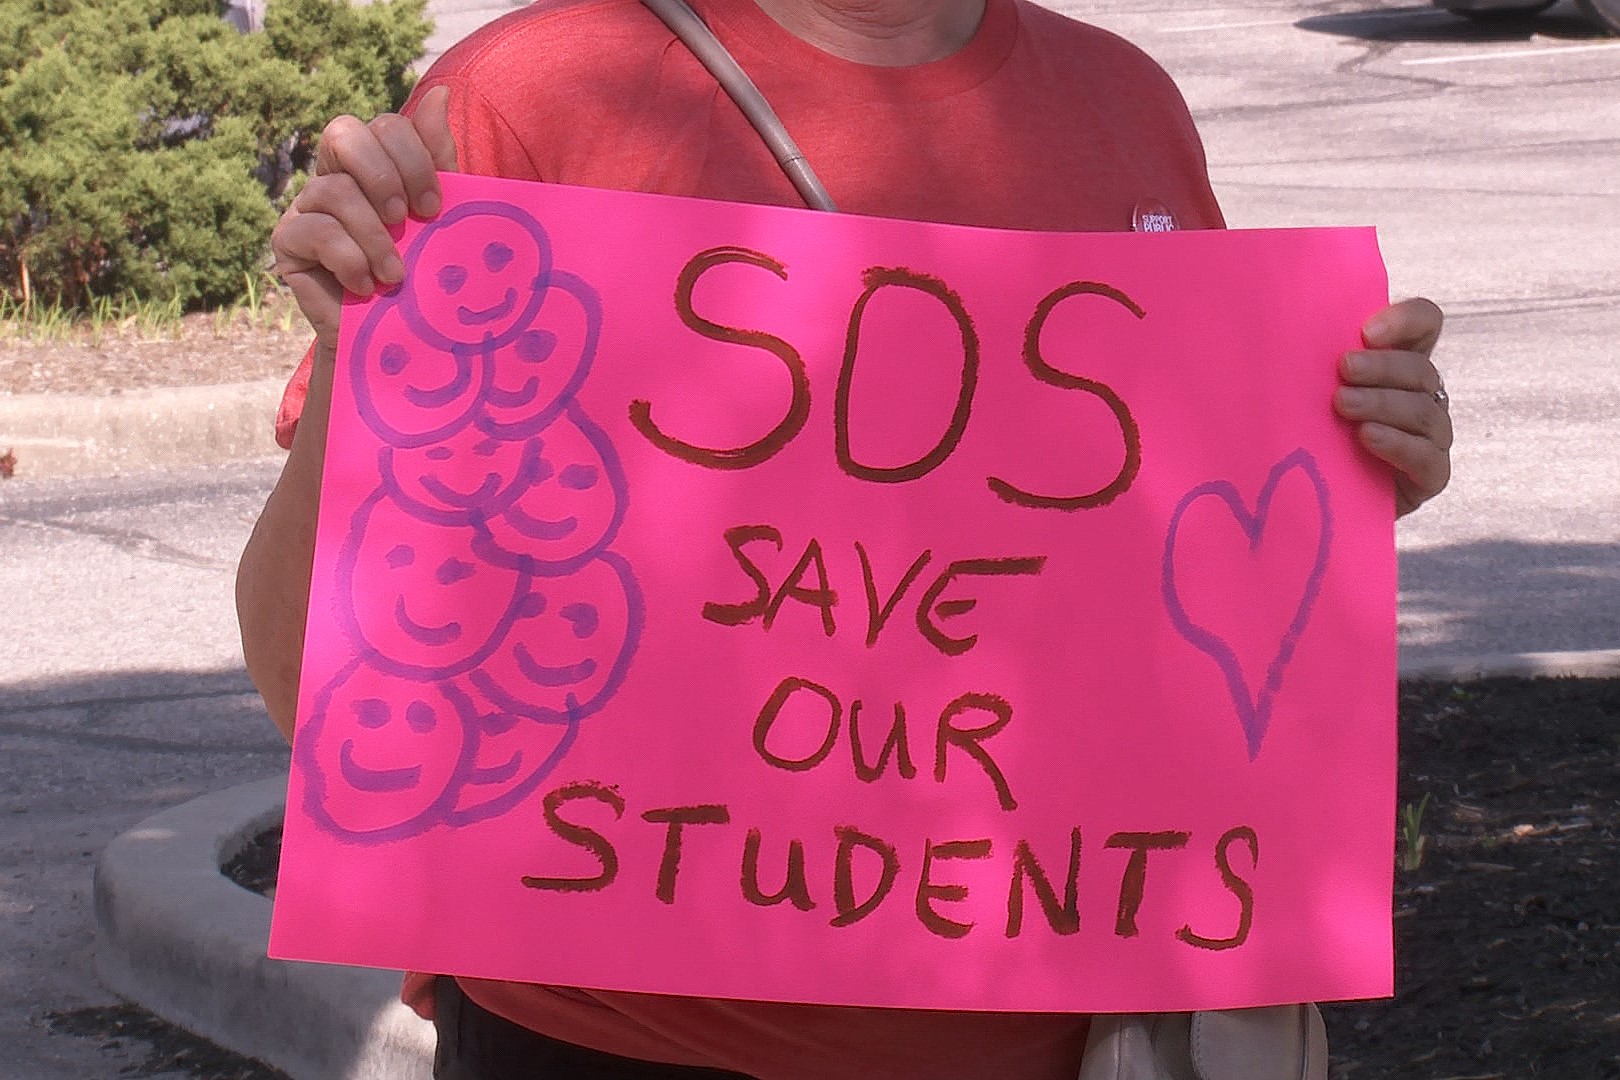 A sign that says "Save Our Students."